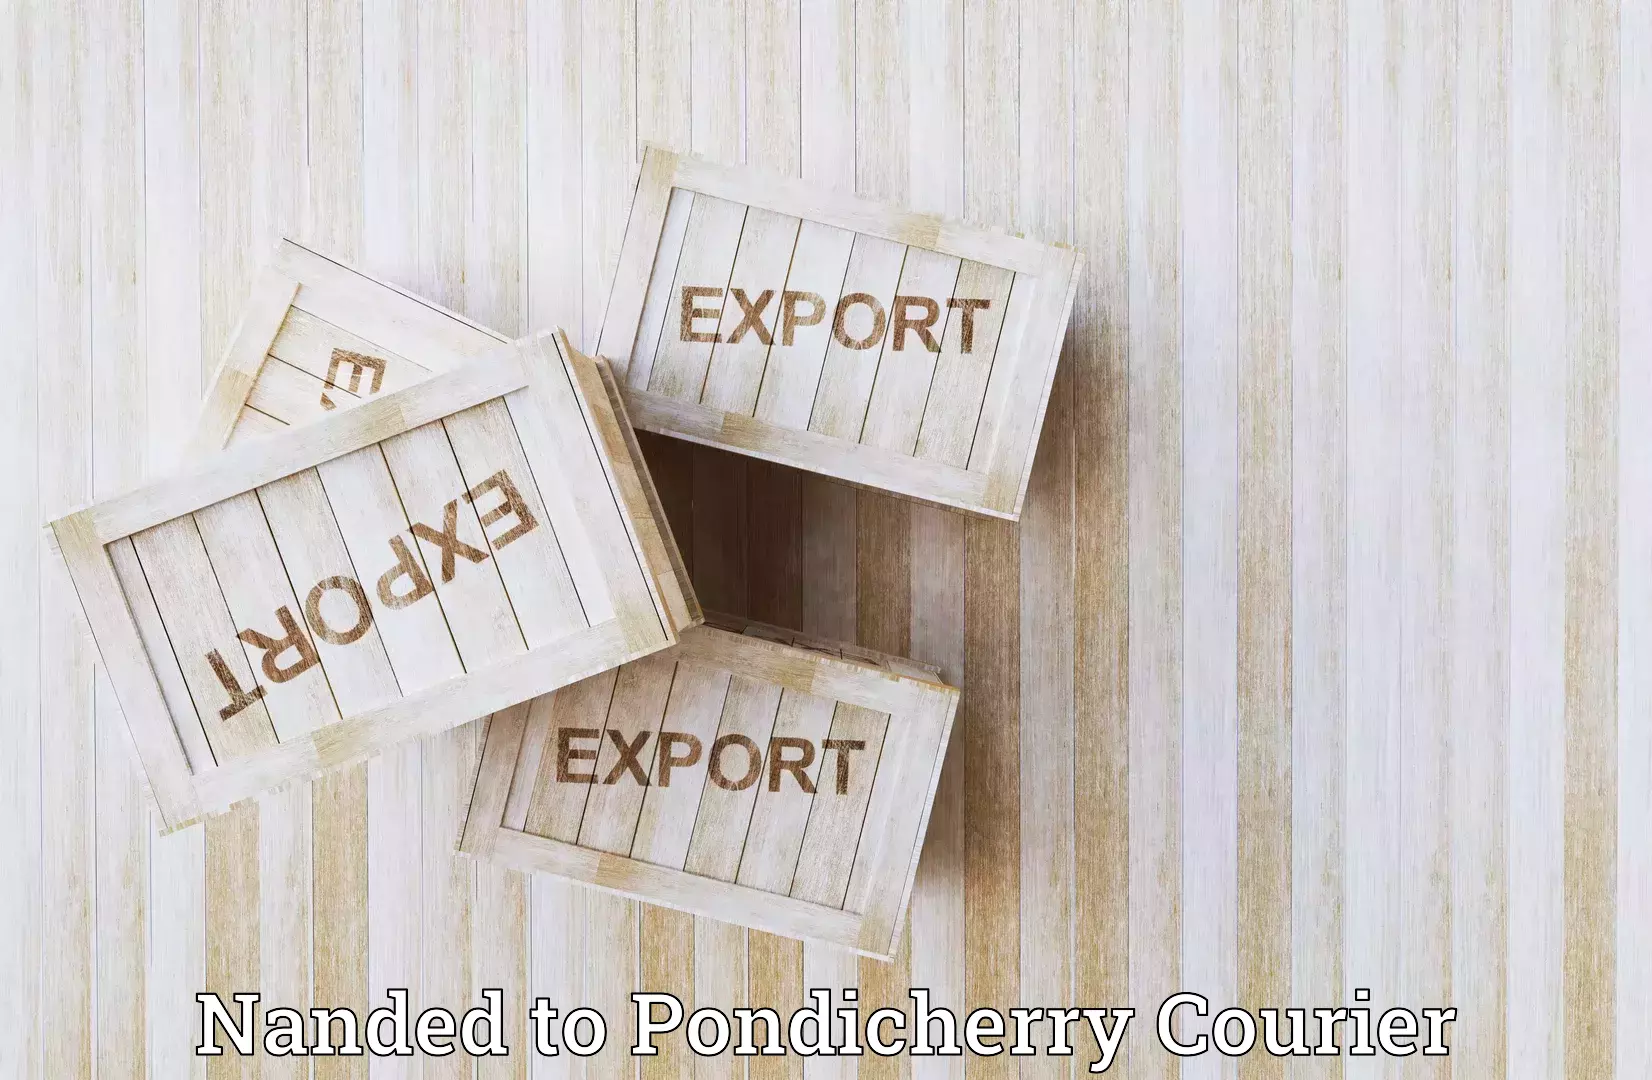 Express logistics providers Nanded to Pondicherry